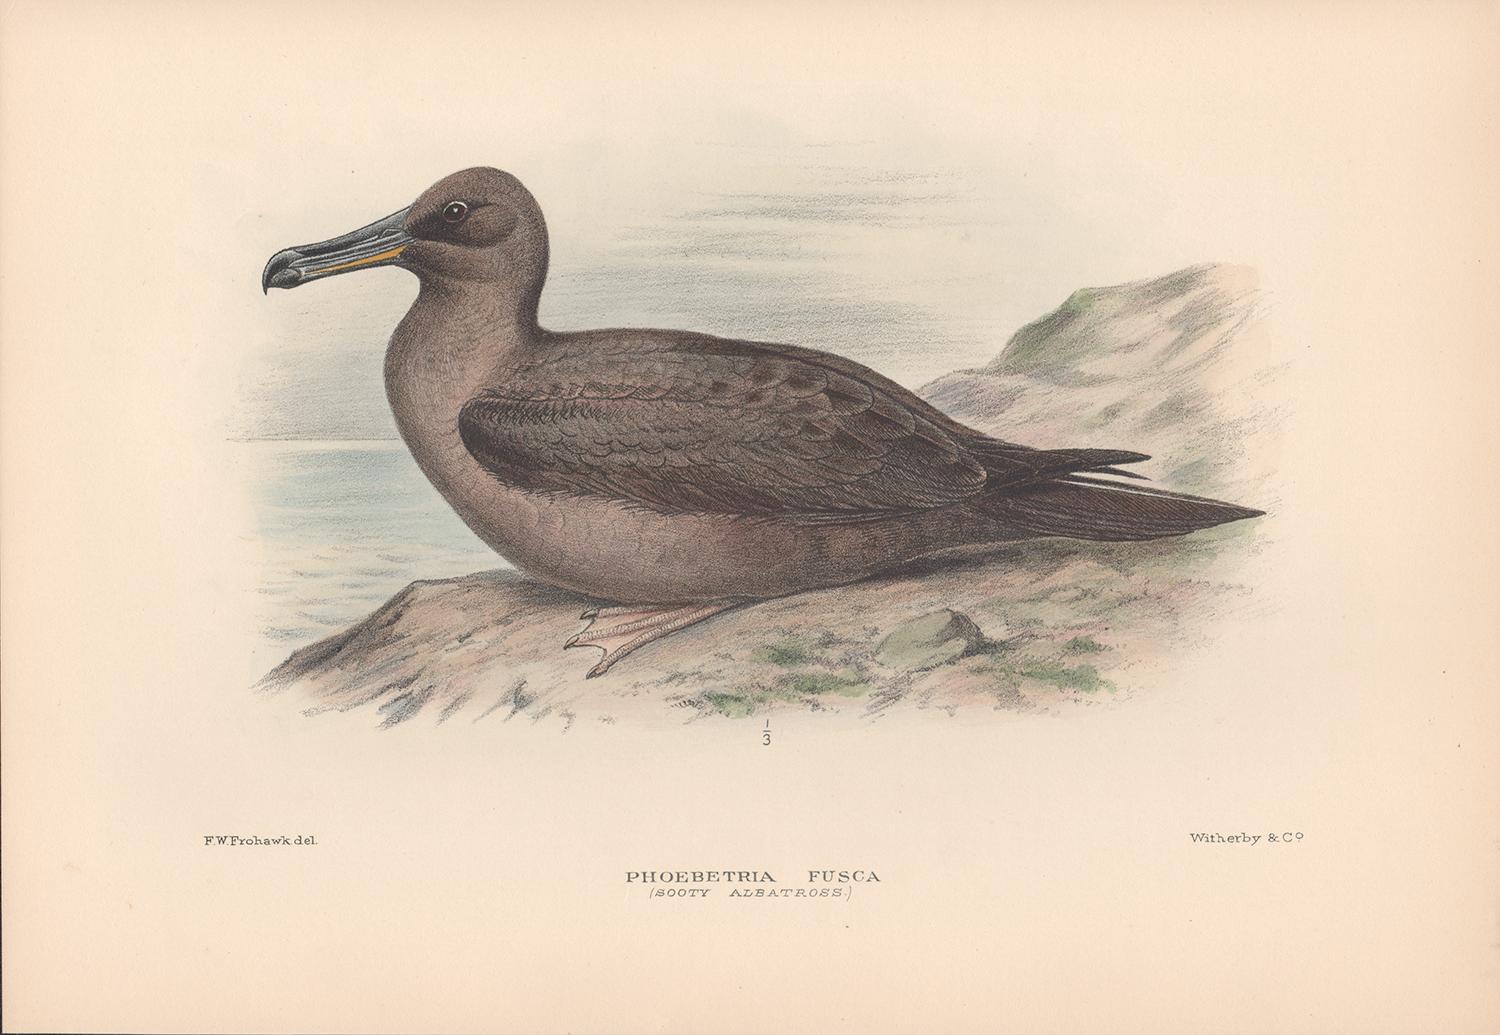 After Henrik Gronvold Animal Print - Sooty Albatross, Sea Bird lithograph with hand-colouring, 1928